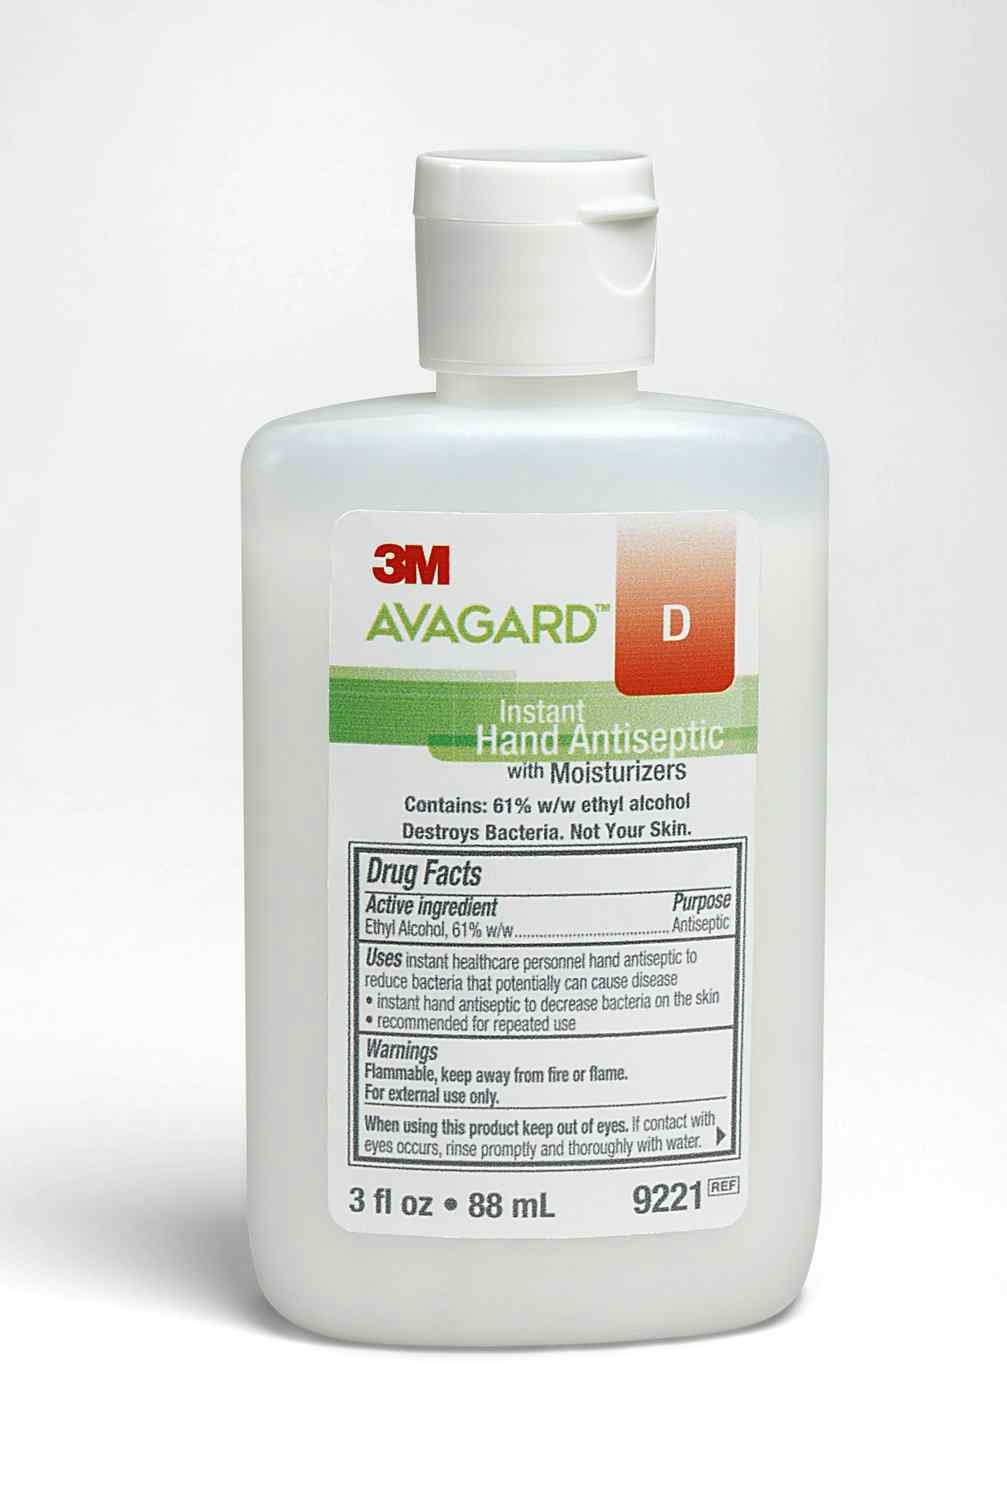 3M Avagard Instant Hand Antiseptic with Moisturizers, 3 oz.